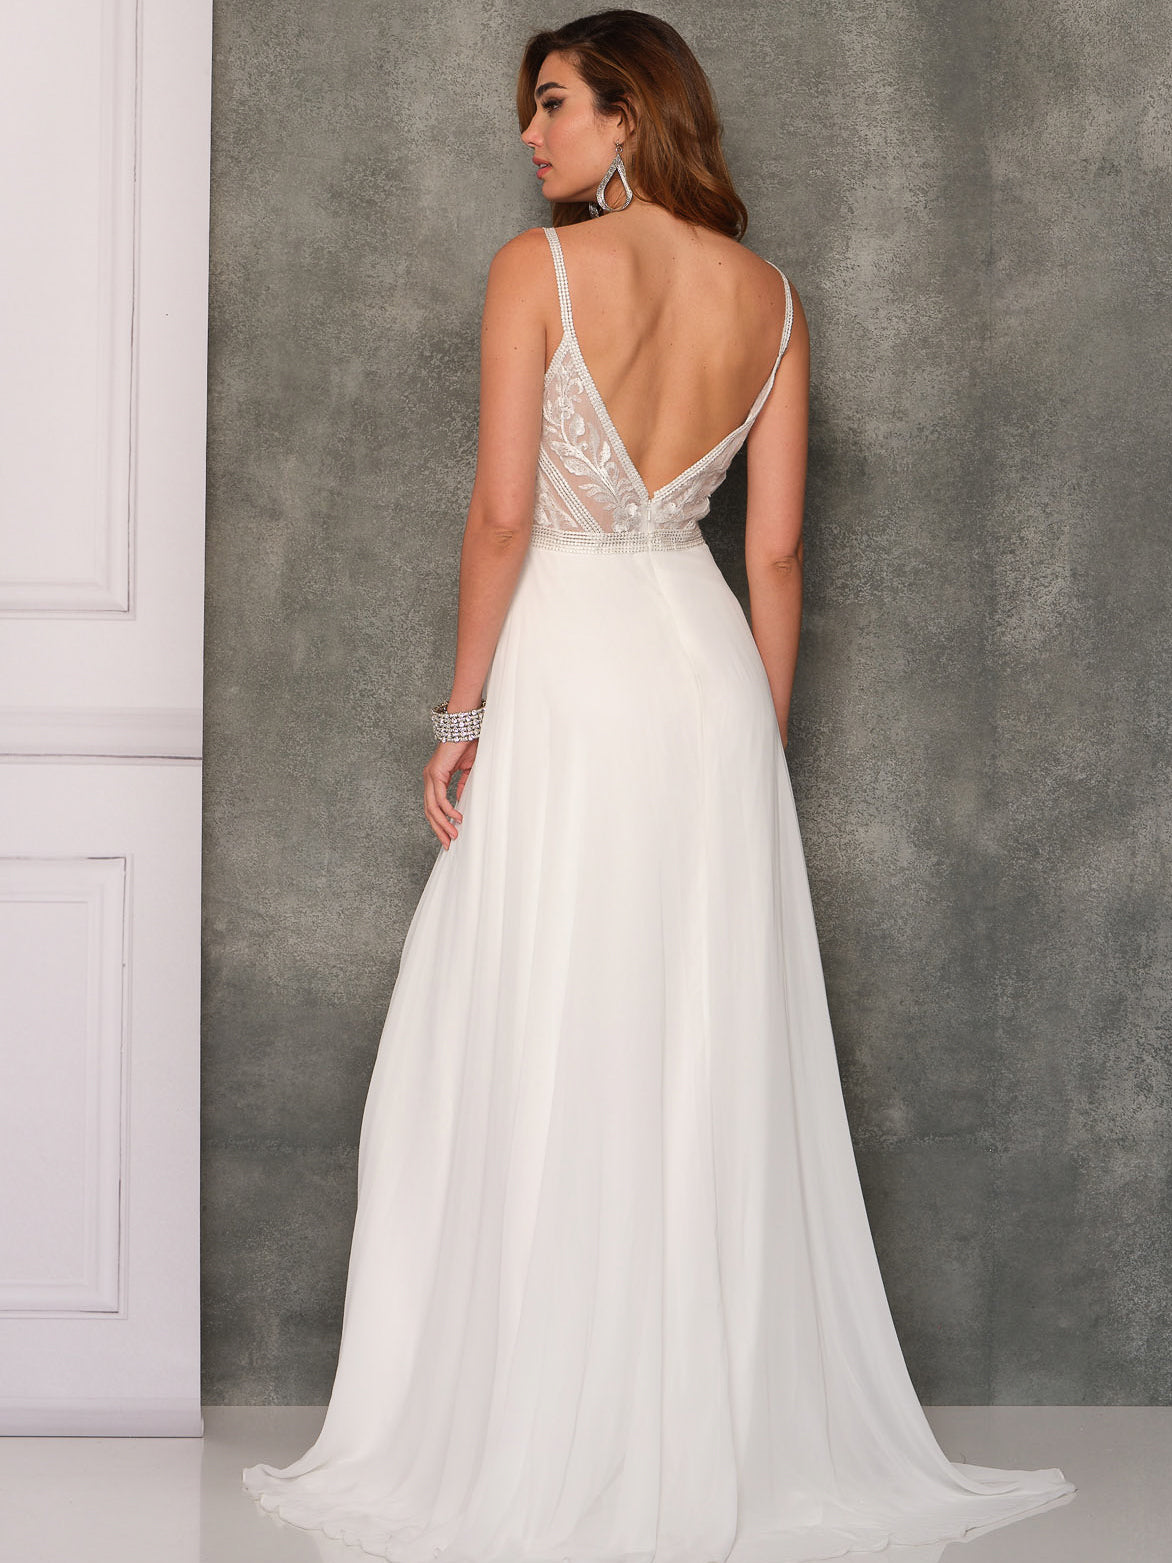 LACE OPEN LEGS V-BACK WEDDING GOWN